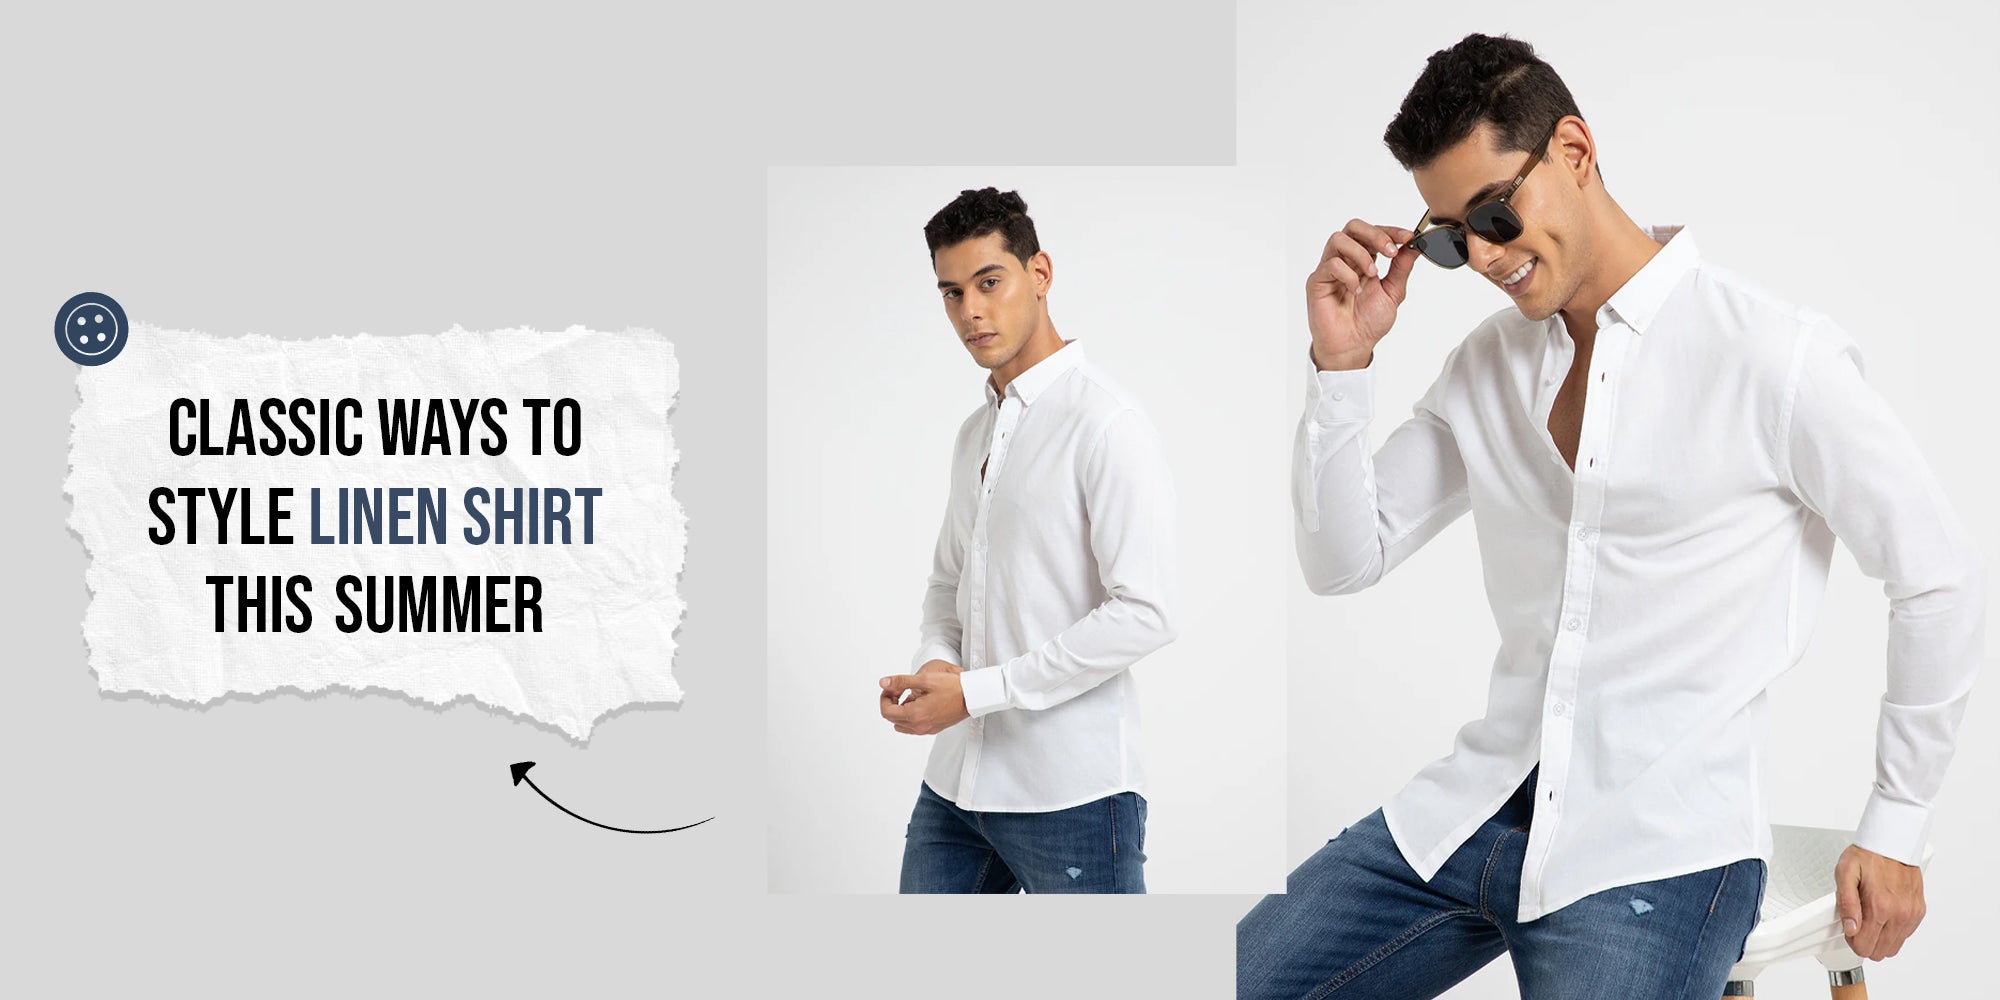 Classic ways to style linen shirt this summer